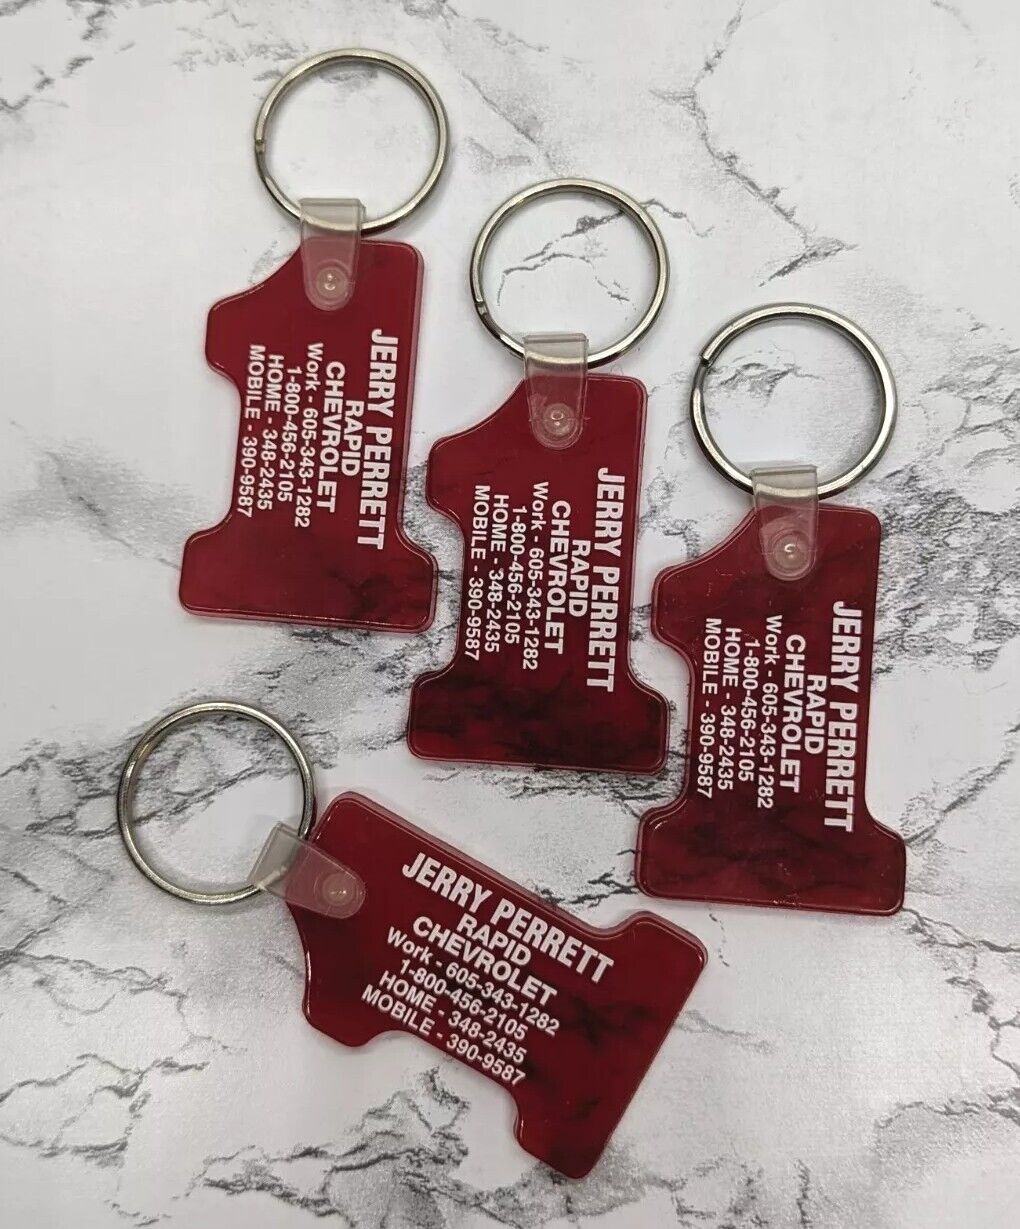 Vintage Rapid Chevrolet Keychain Lot of 4 Dealership #1 Red Advertising Chevy